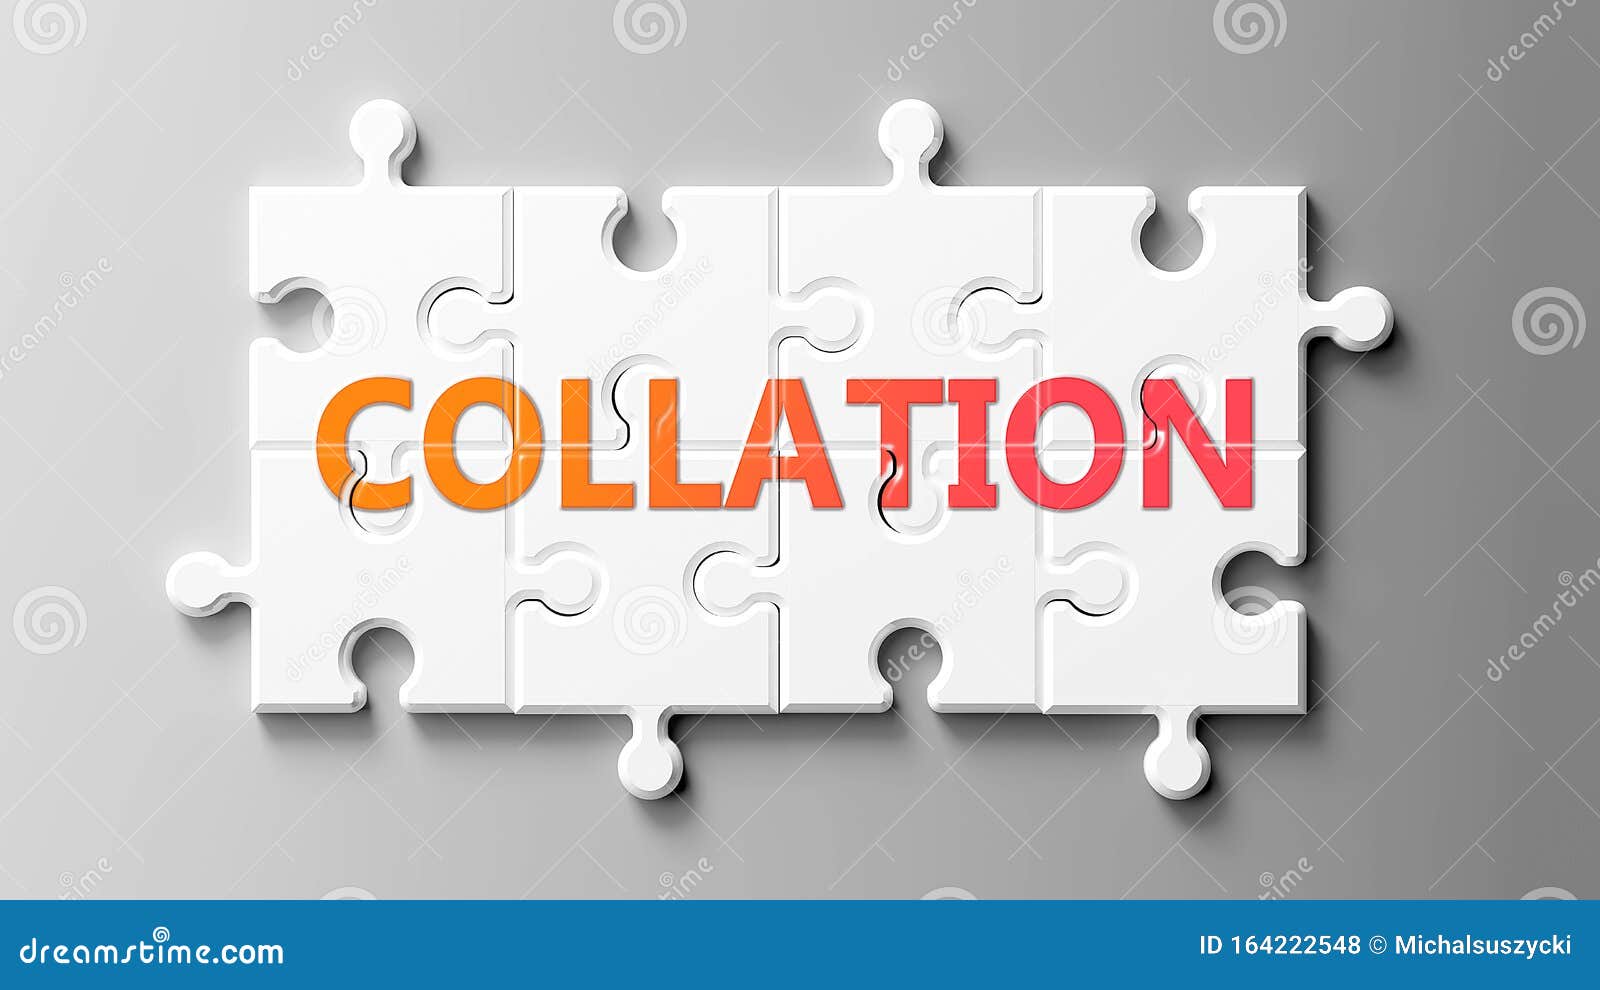 collation complex like a puzzle - pictured as word collation on a puzzle pieces to show that collation can be difficult and needs